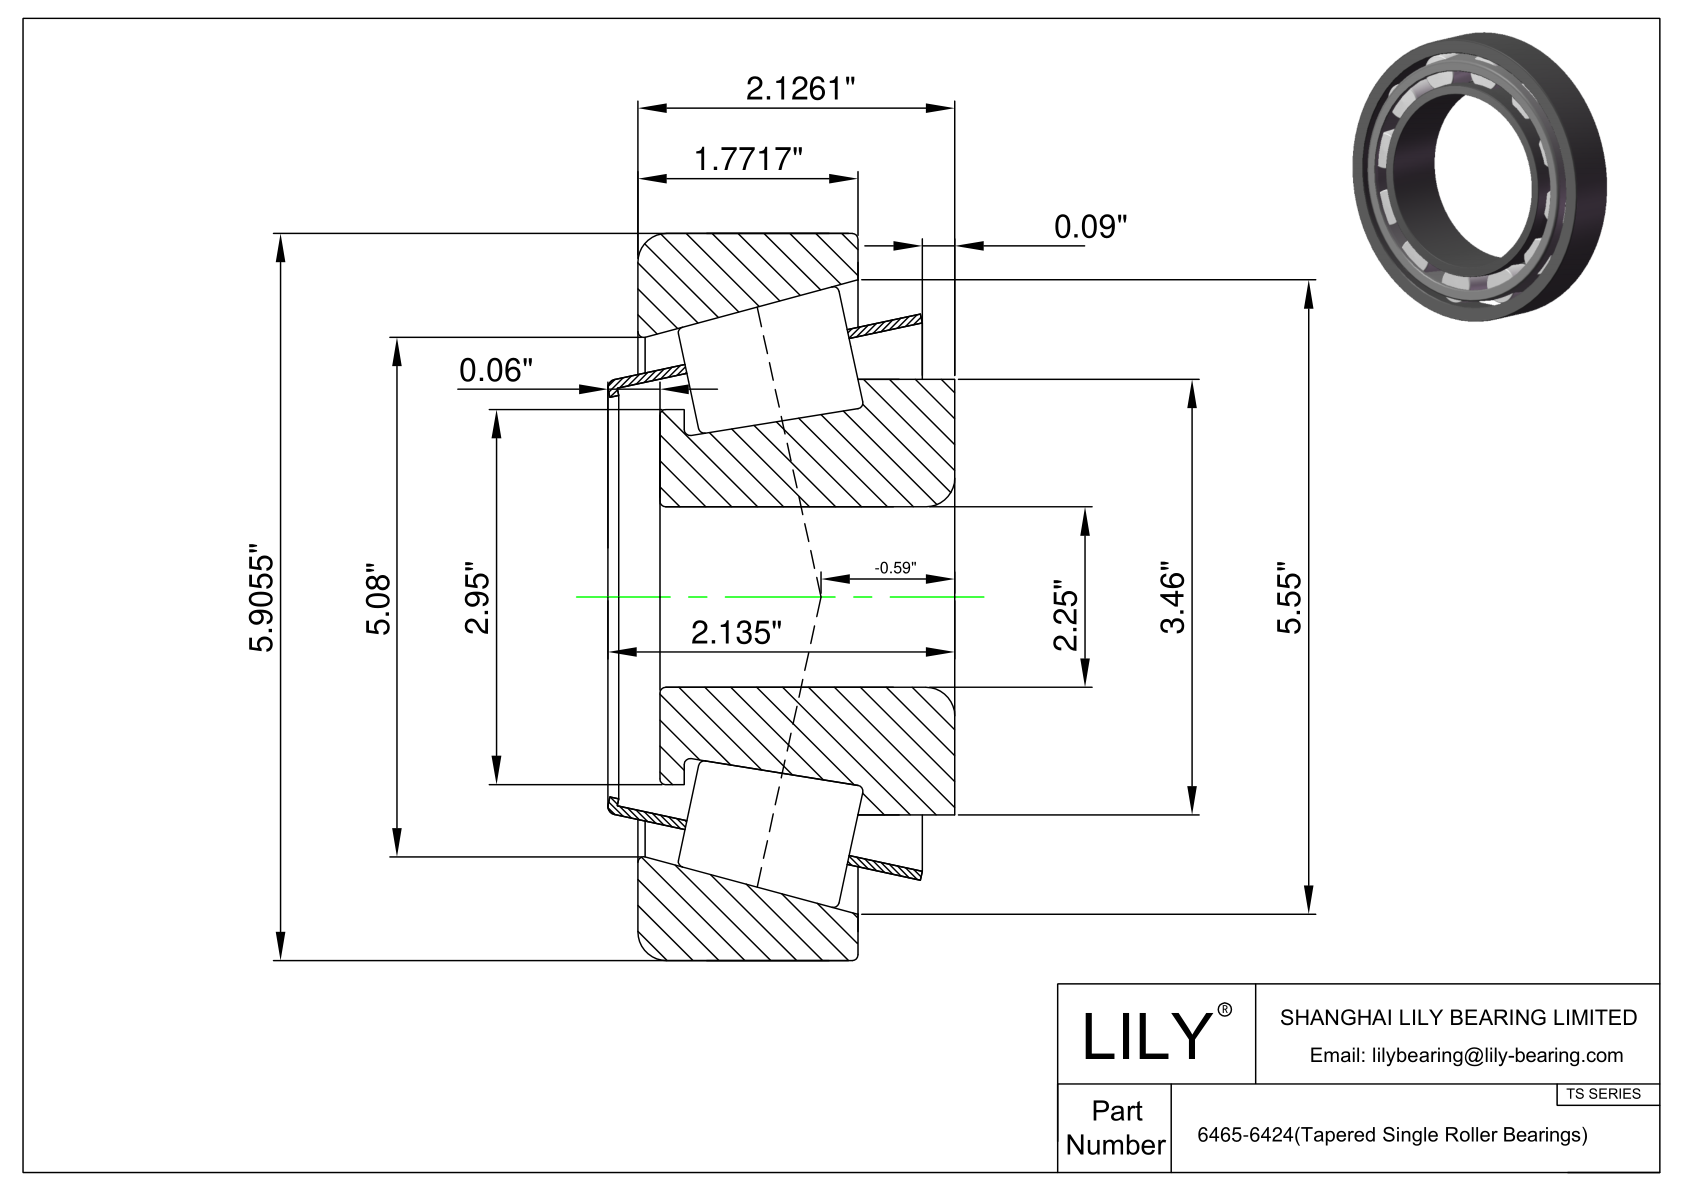 6465-6424 TS (Tapered Single Roller Bearings) (Imperial) cad drawing